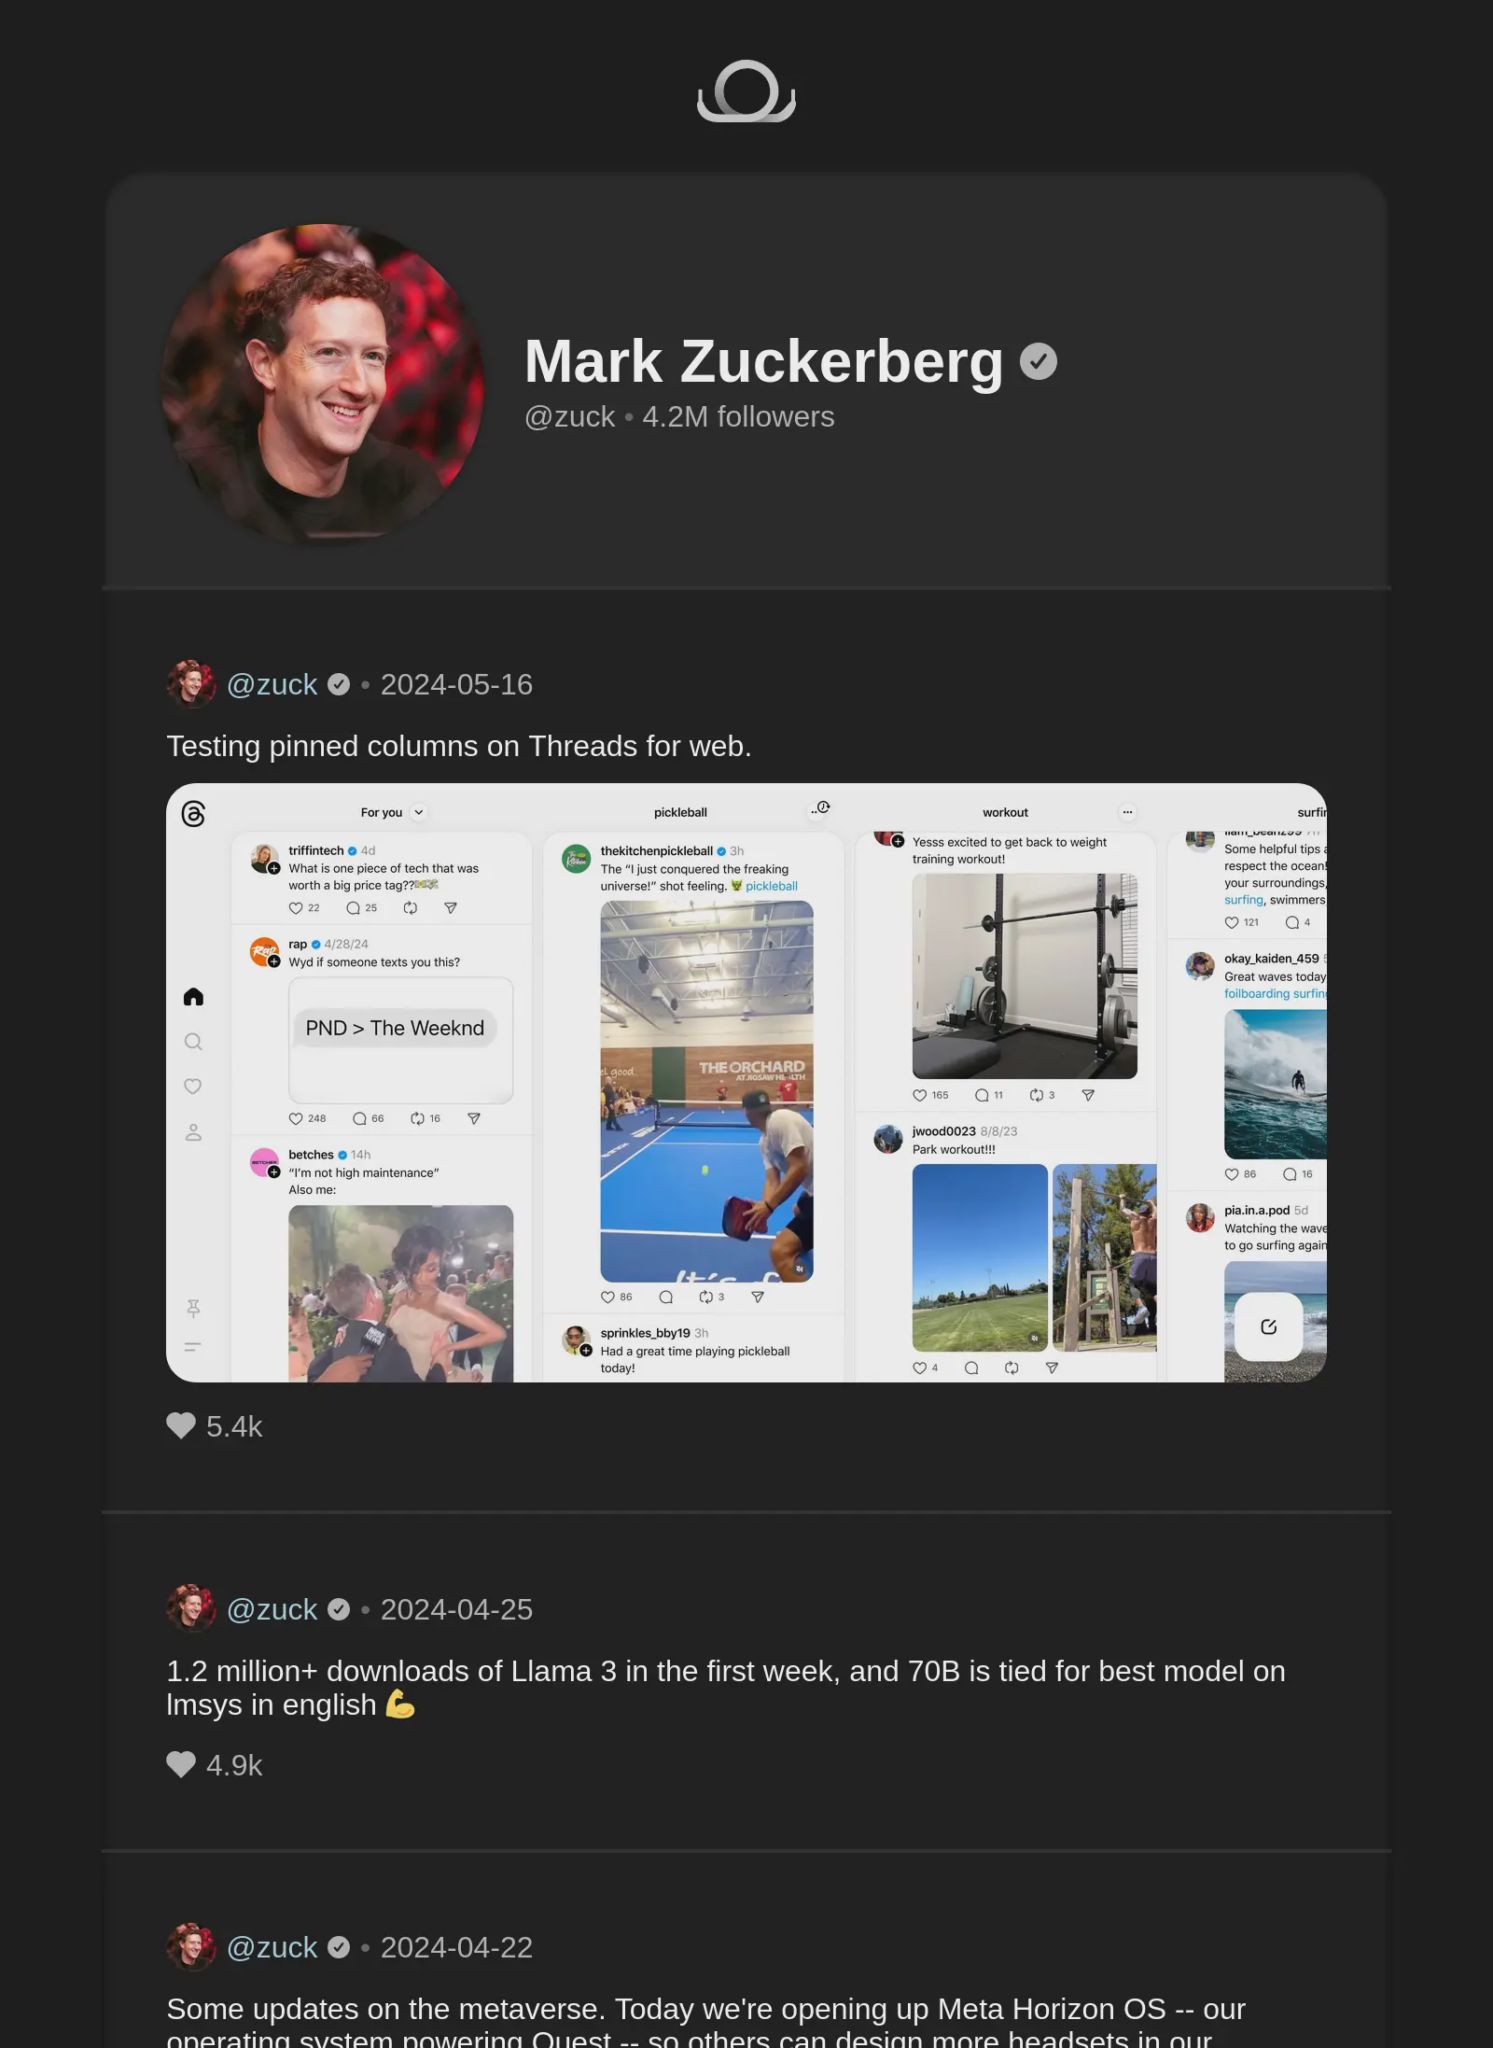 Mark Zuckerberg’s profile on Shoelace, showing three posts: One showcasing columns on the official Threads frontend, another congratulating himself for 1.2M+ downloads in his company’s new AI software, and the glimpse of a post related to the “metaverse”